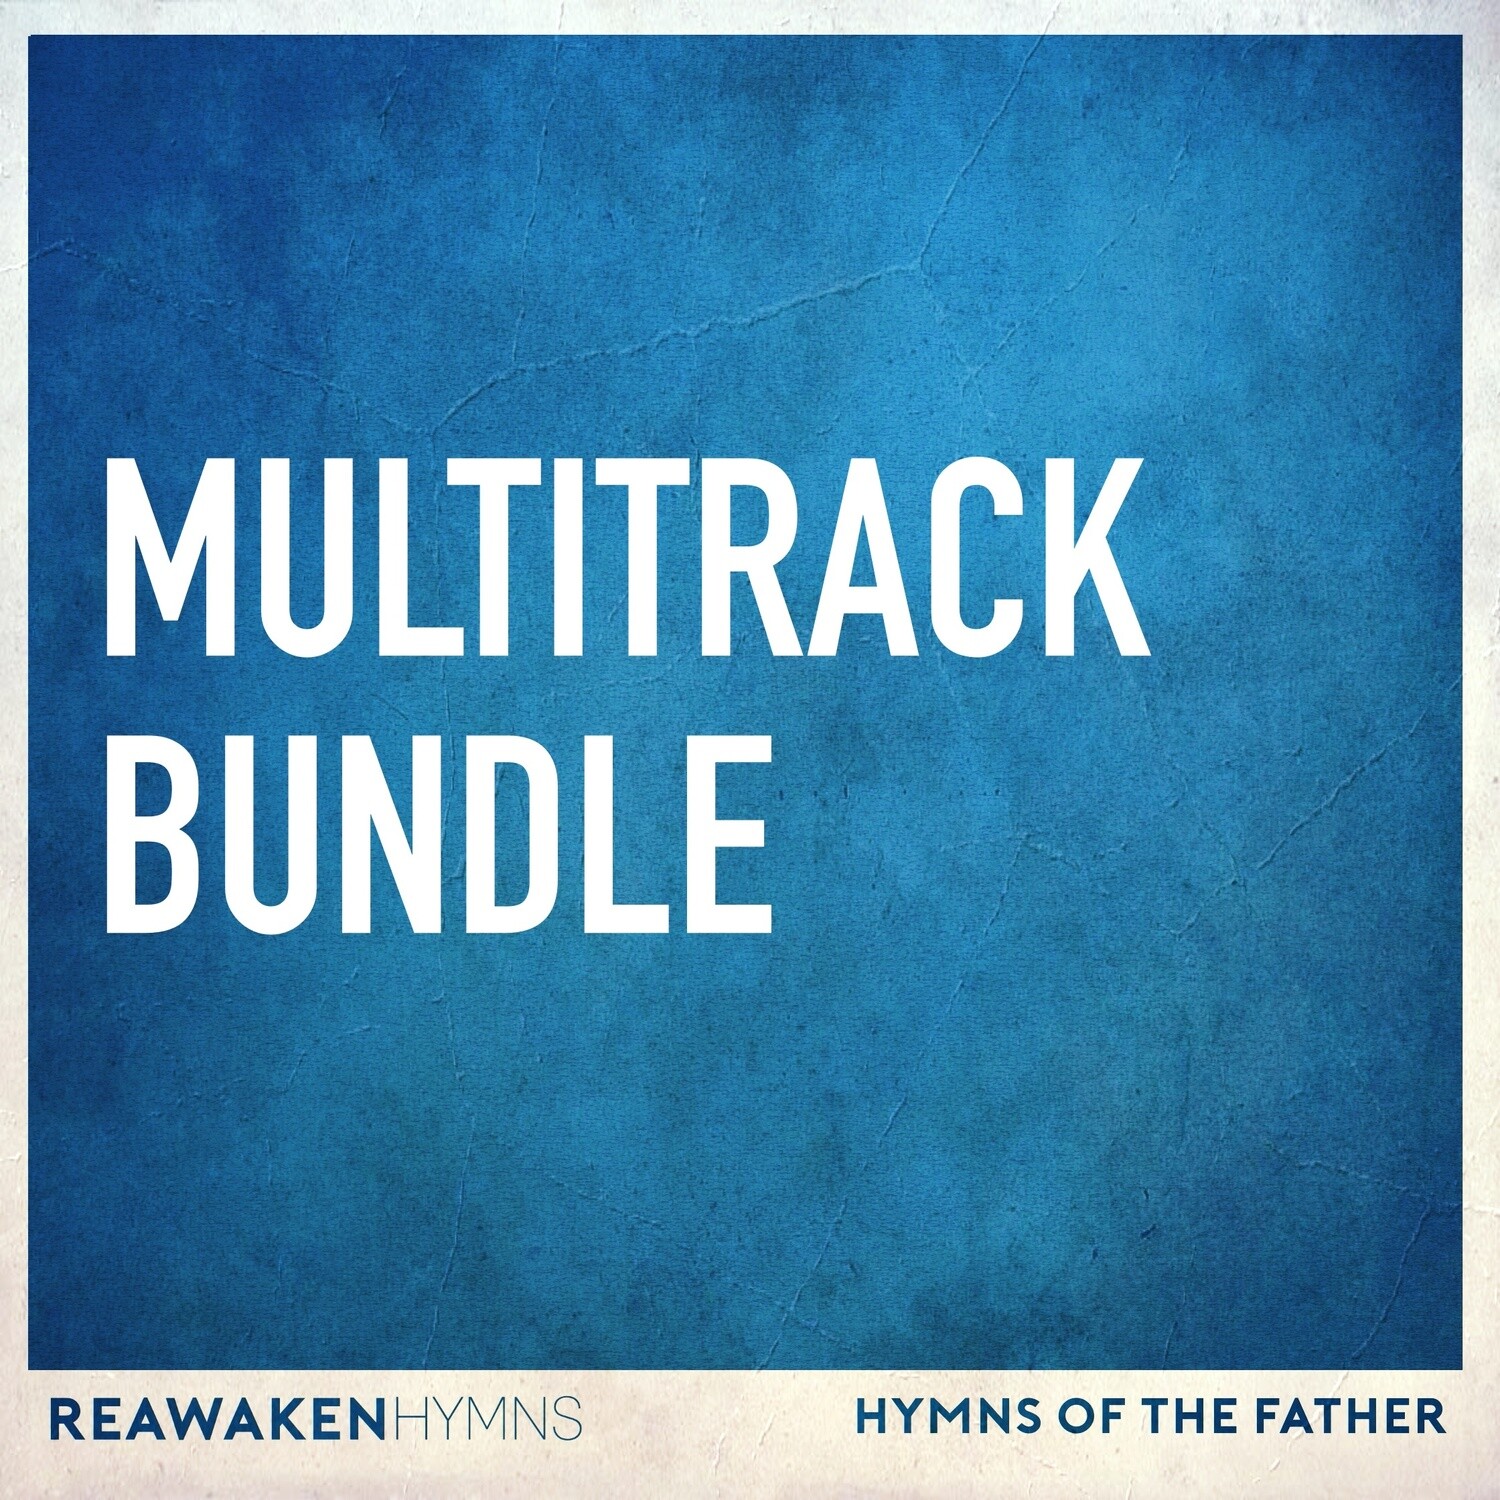 Hymns of the Father Multitrack bundle